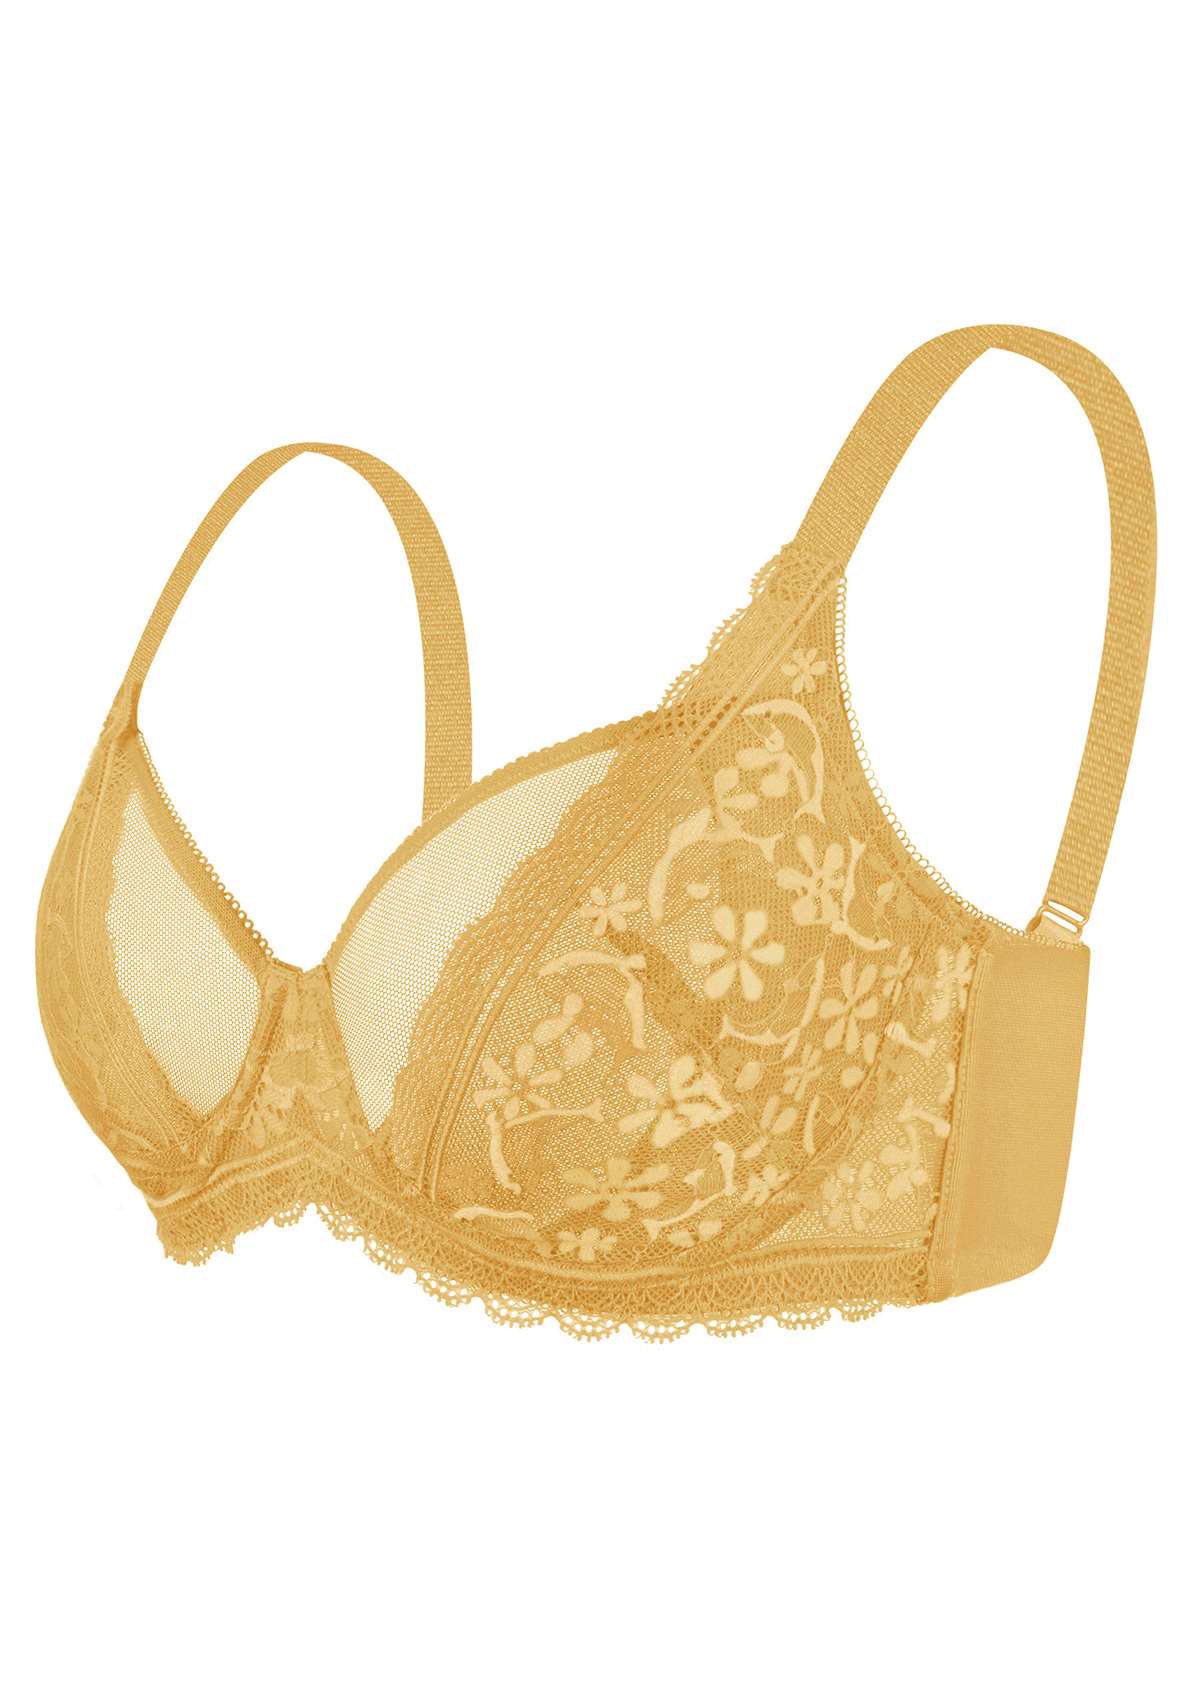 HSIA Anemone Lace Unlined Bra: Supportive, Lightweight Bra - Ginger / 38 / DD/E